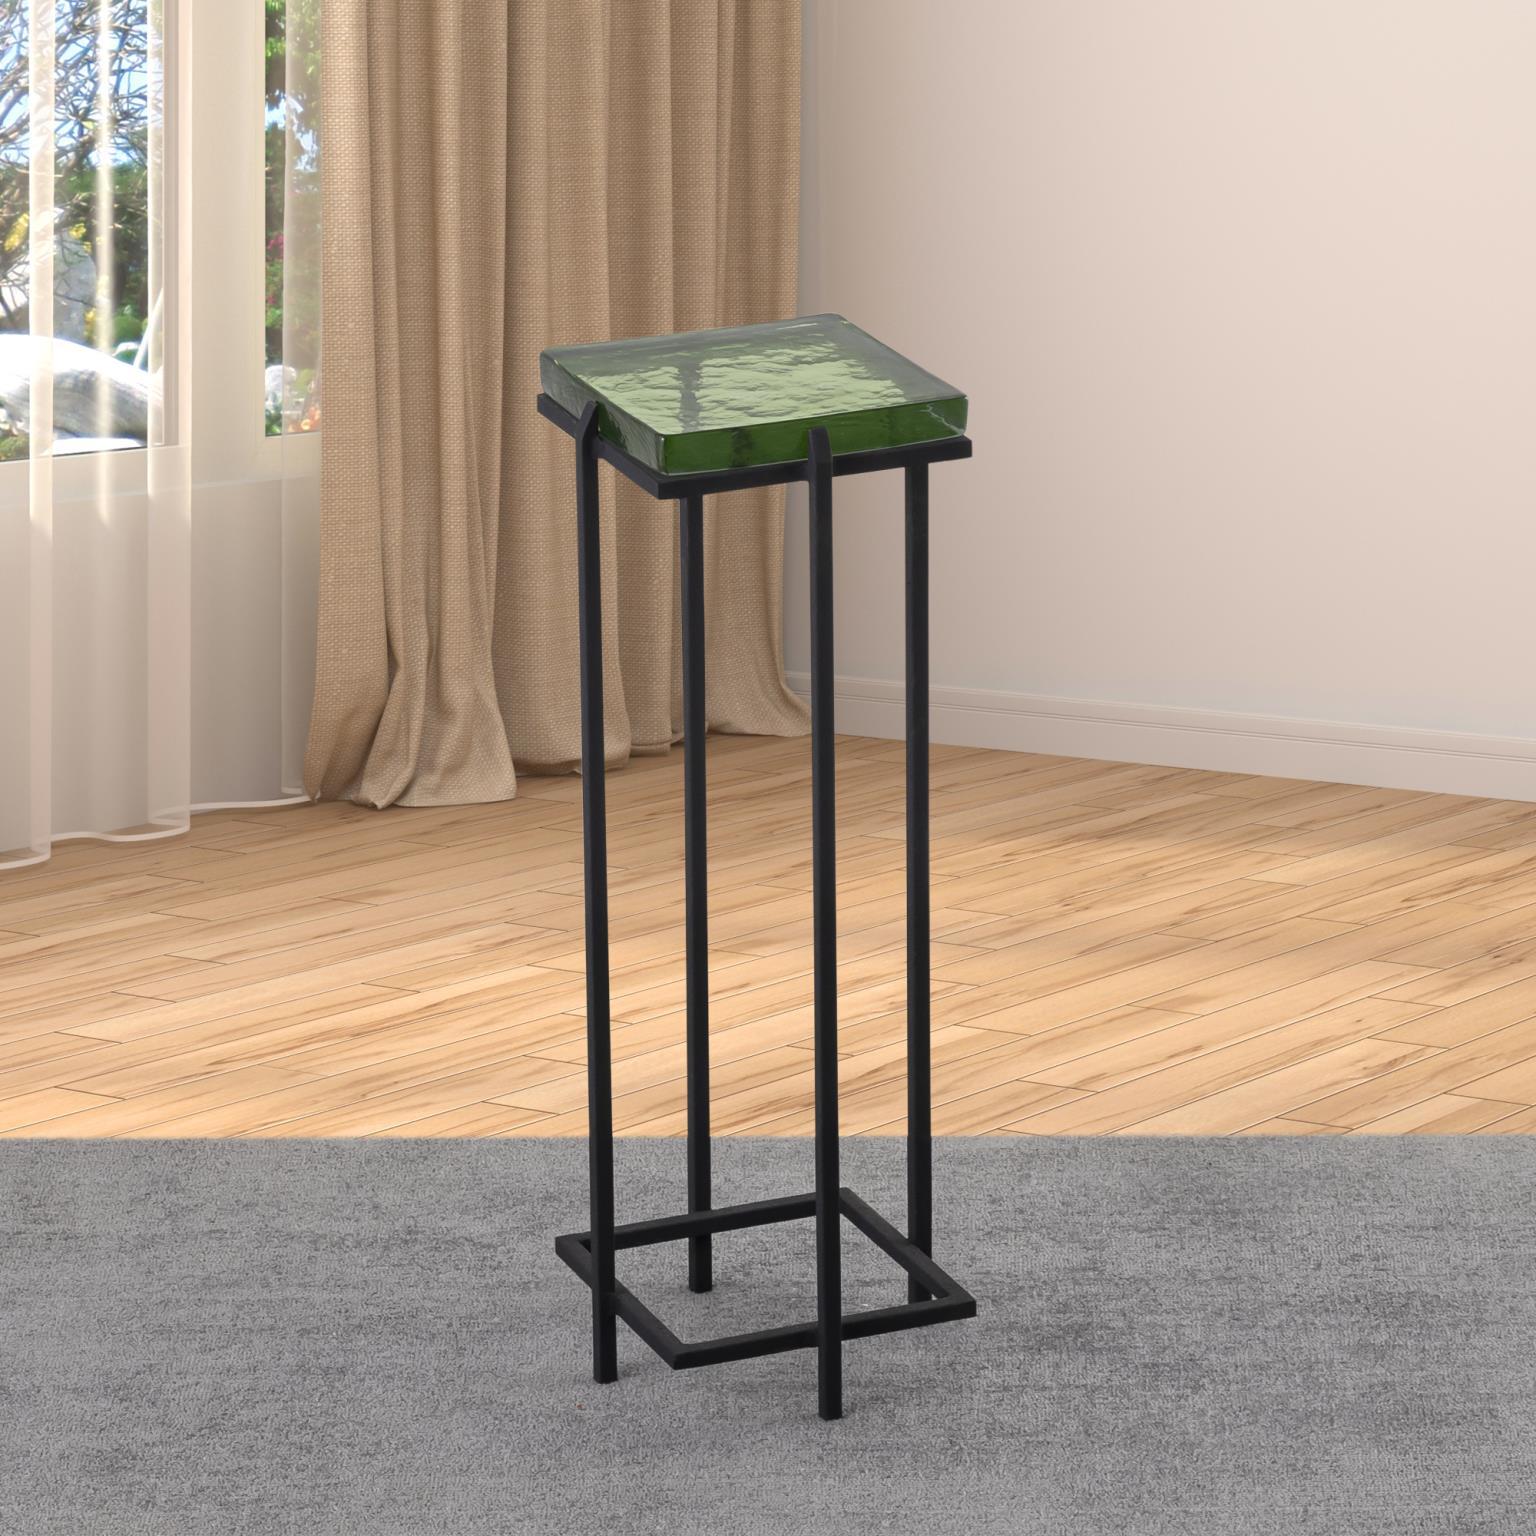 Modern Side Table T505-8 Drink Table 718852652758 718852652758 in Green 